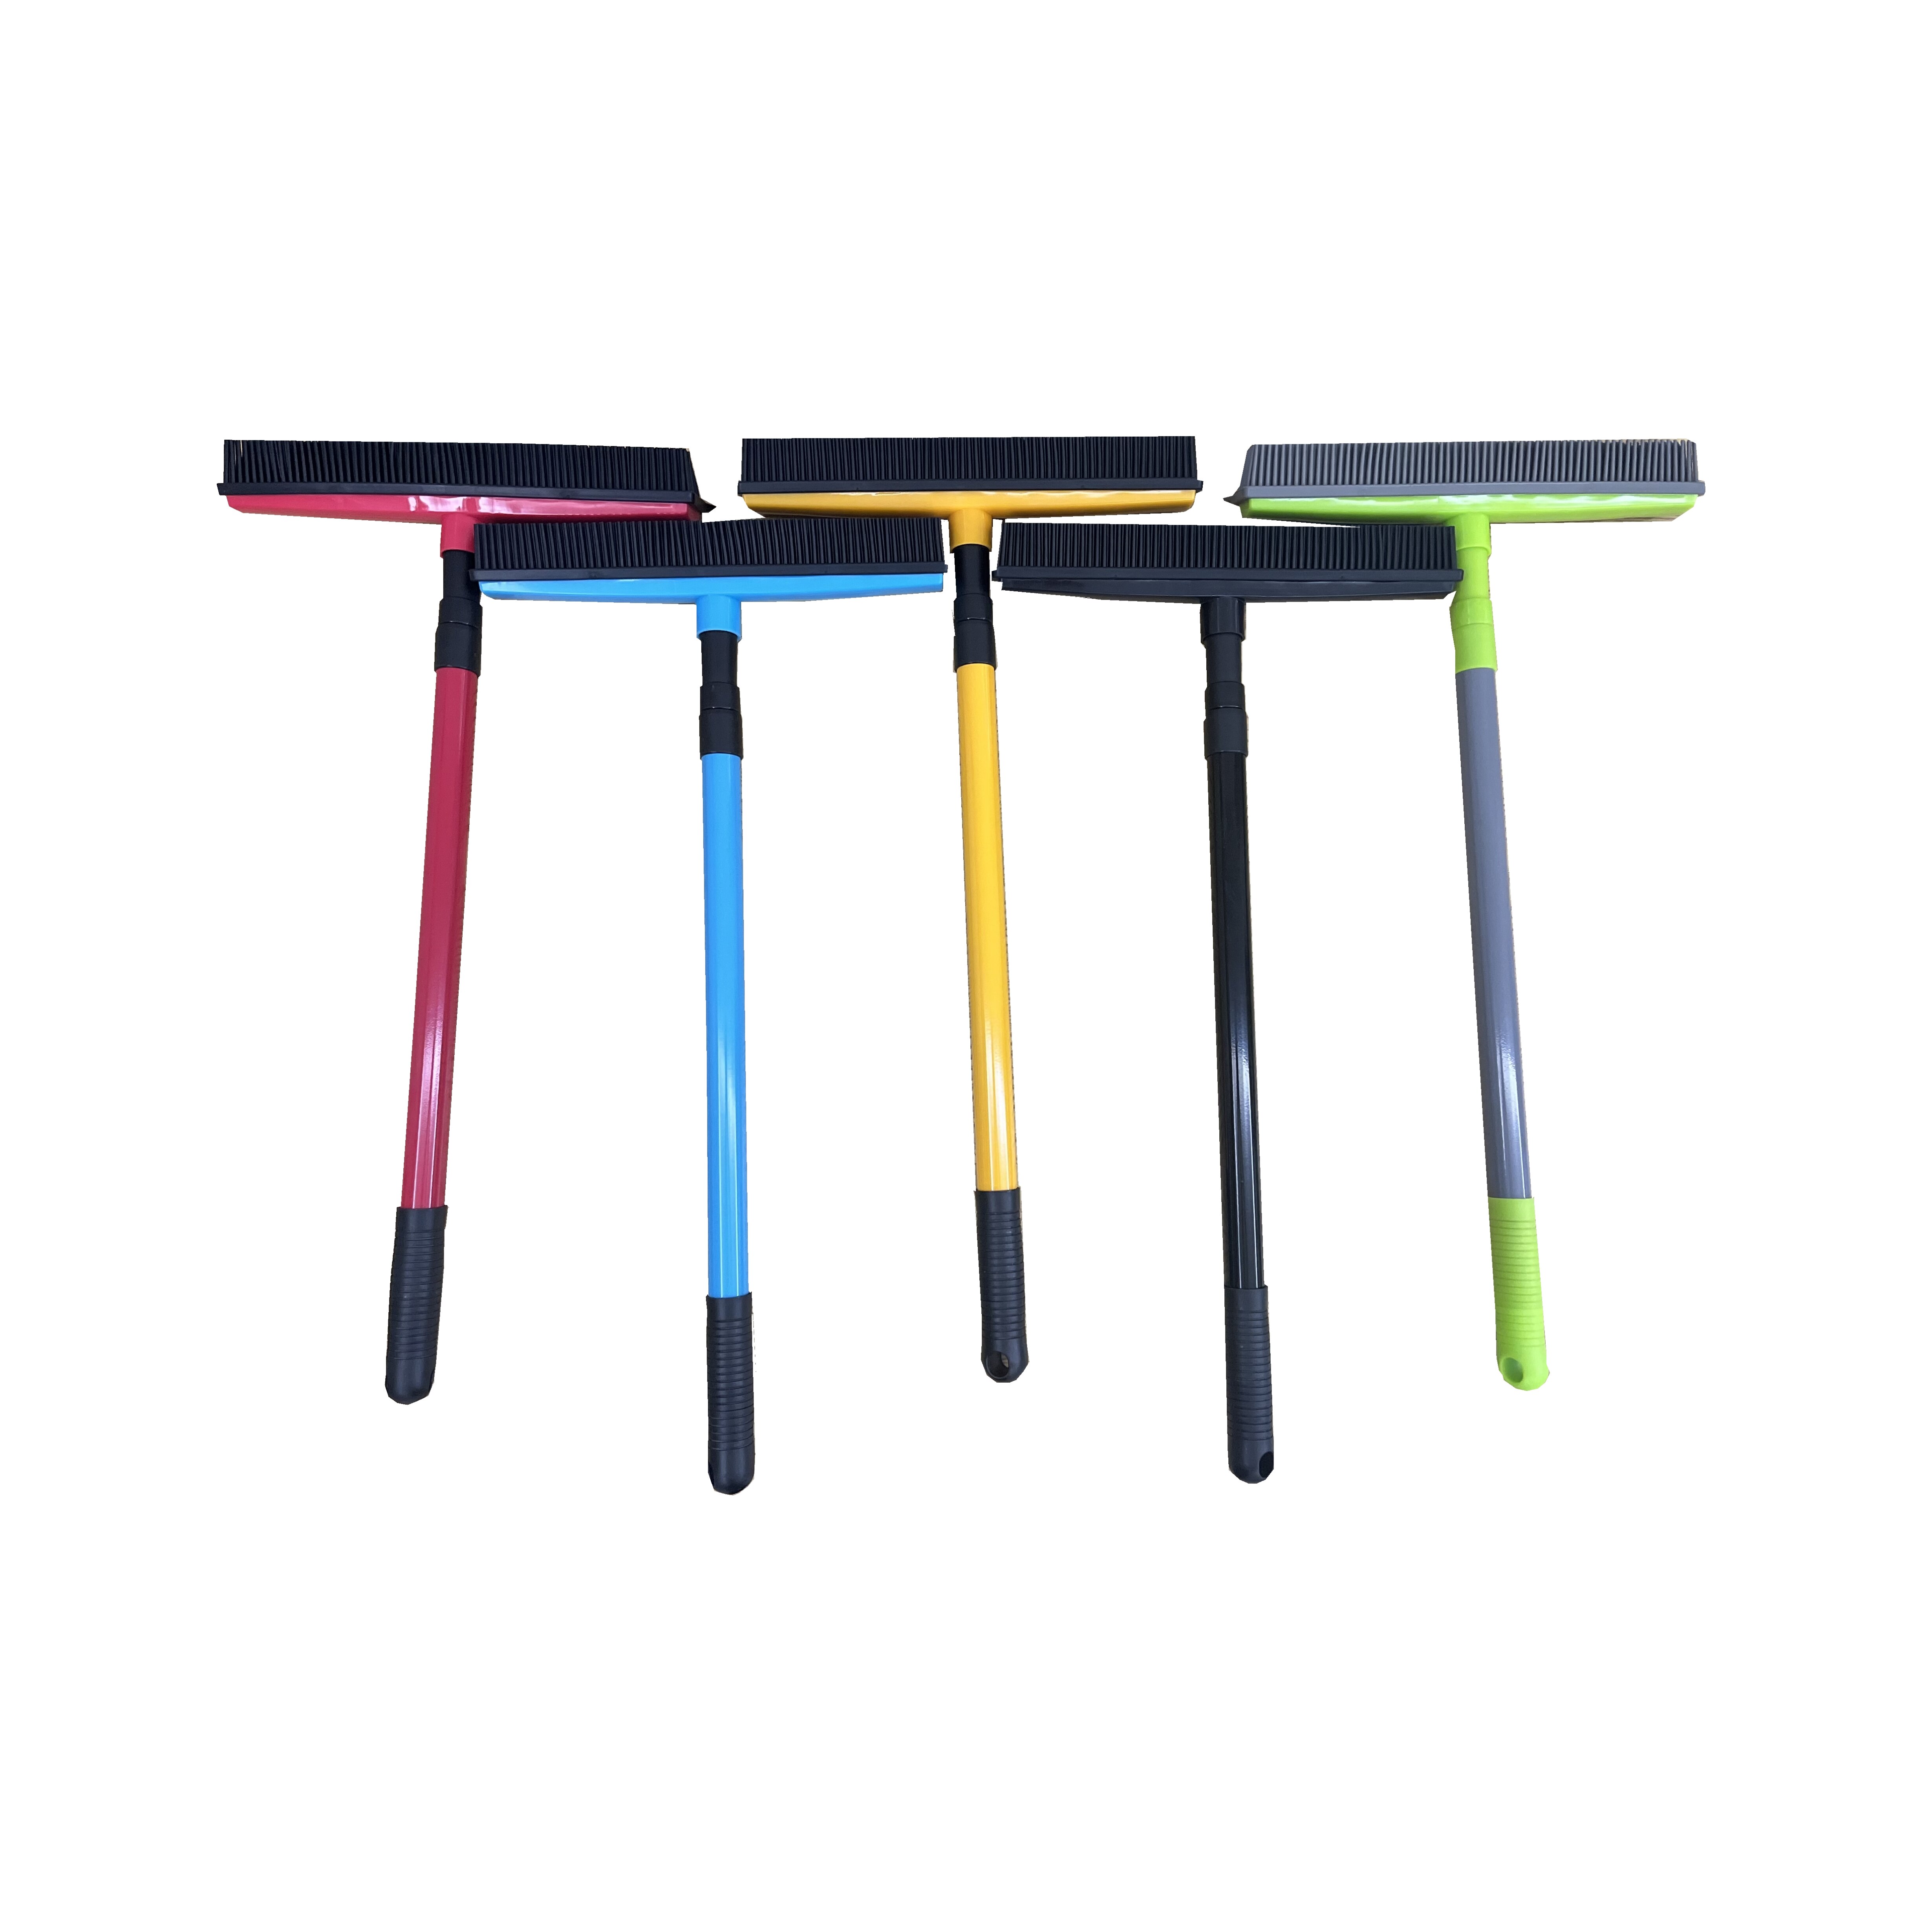 Floor Hair Broom Dust Scraper and Pet Rubber Brush Multifunctional Durable High Quality Household Mop Cleaning Mop